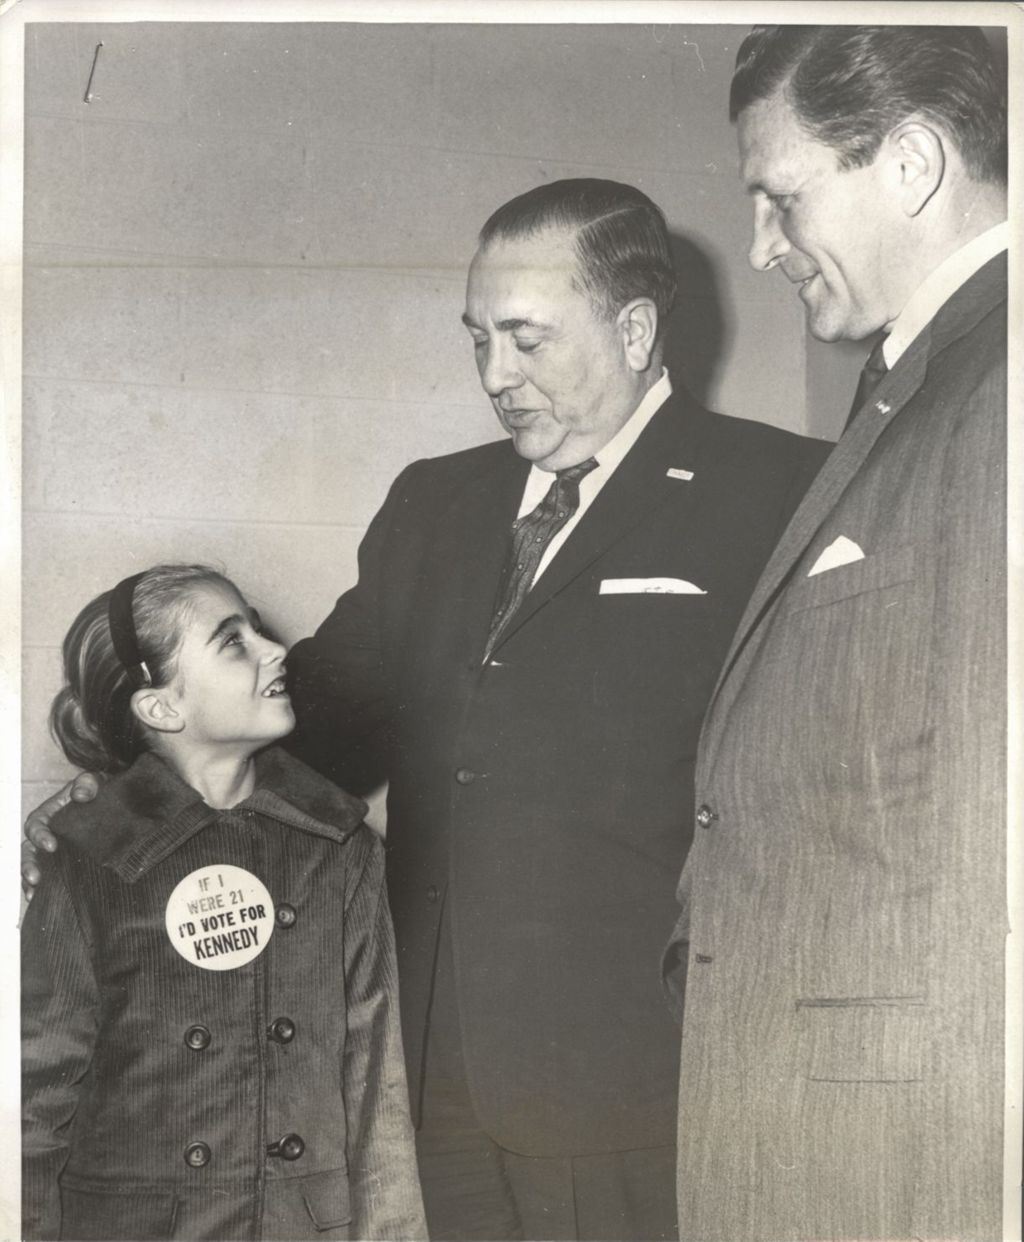 Richard J. Daley with young girl wearing button supporting Kennedy